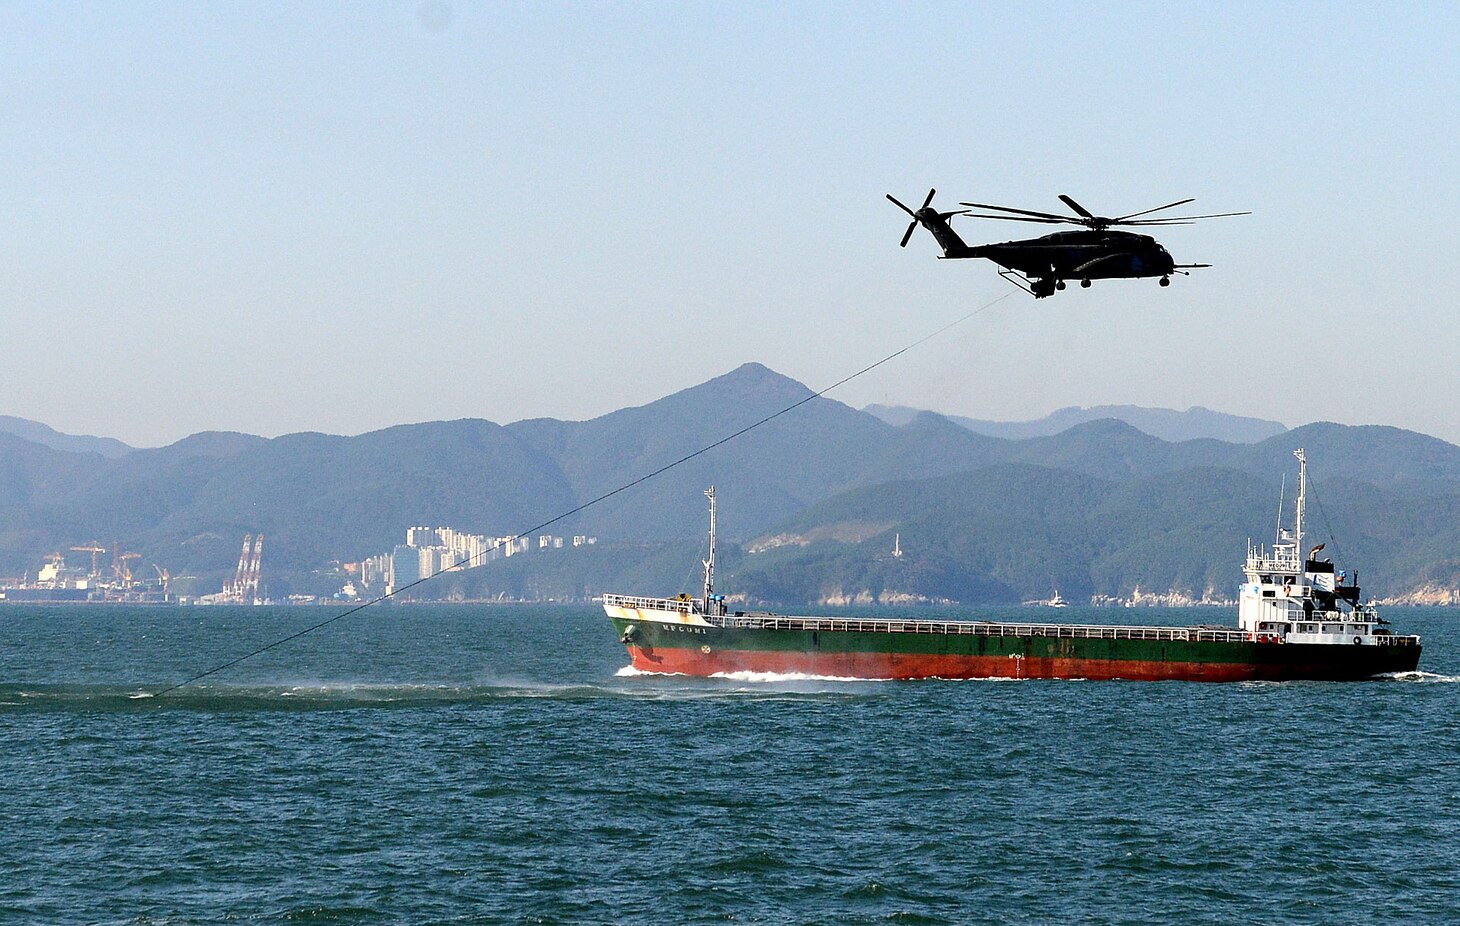 A U.S. Navy MH-53E Sea Dragon helicopter assigned to Detachment 1, Helicopter Mine Countermeasures Squadron (HM) 14 tows sonar equipment through the water in support of exercise Clear Horizon 2014 in the East China Sea Oct. 23, 2014. Clear Horizon is an annual bilateral exercise between the U.S. and South Korean navies designed to enhance cooperation and improve capabilities in mine countermeasure operations. (U.S. Navy photo by Mass Communication Specialist 1st Class Frank L. Andrews/Released)